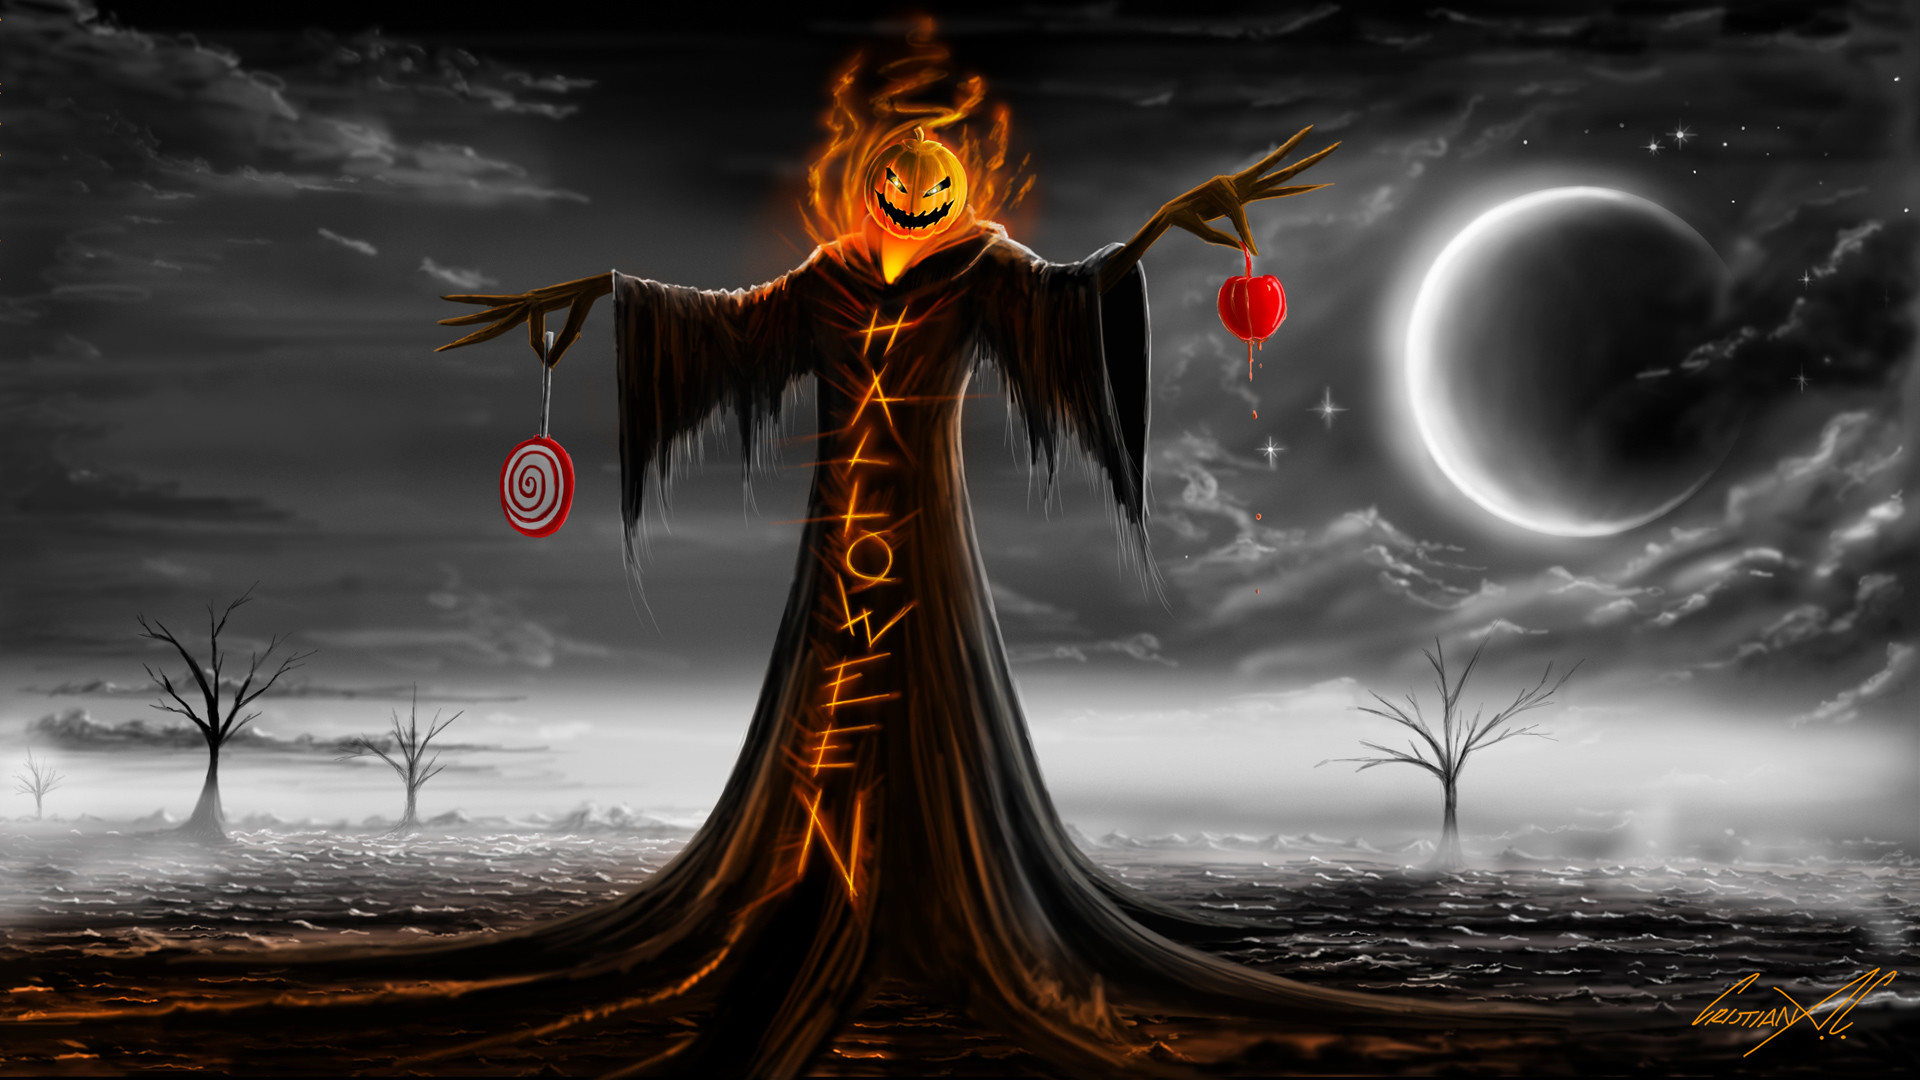 Halloween Specter Scarecrow Pumpkin Fire Flames Tunic Lollipops Moon Stars Clouds Night Trees Desert Scare Fear Painting hd wallpaper by LadyGaga